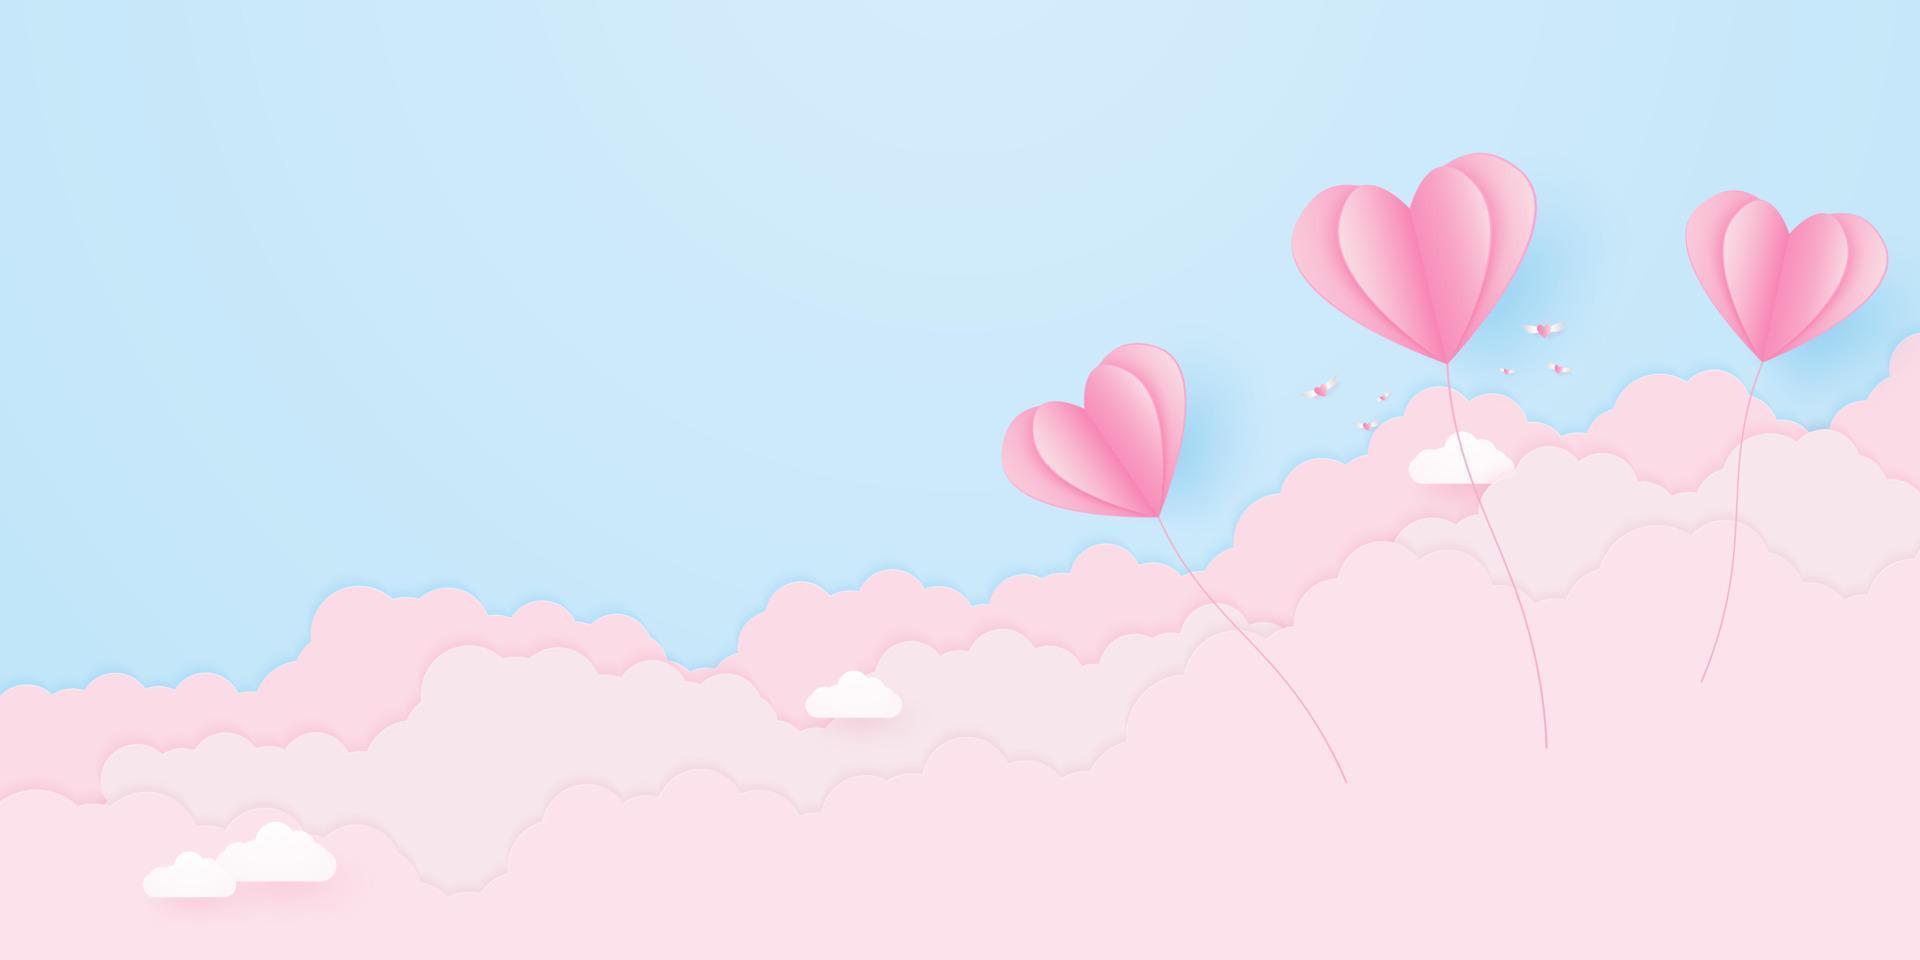 Valentine's day, love concept background, paper pink heart shaped balloons floating in the sky with cloud, blank space, paper art style vector